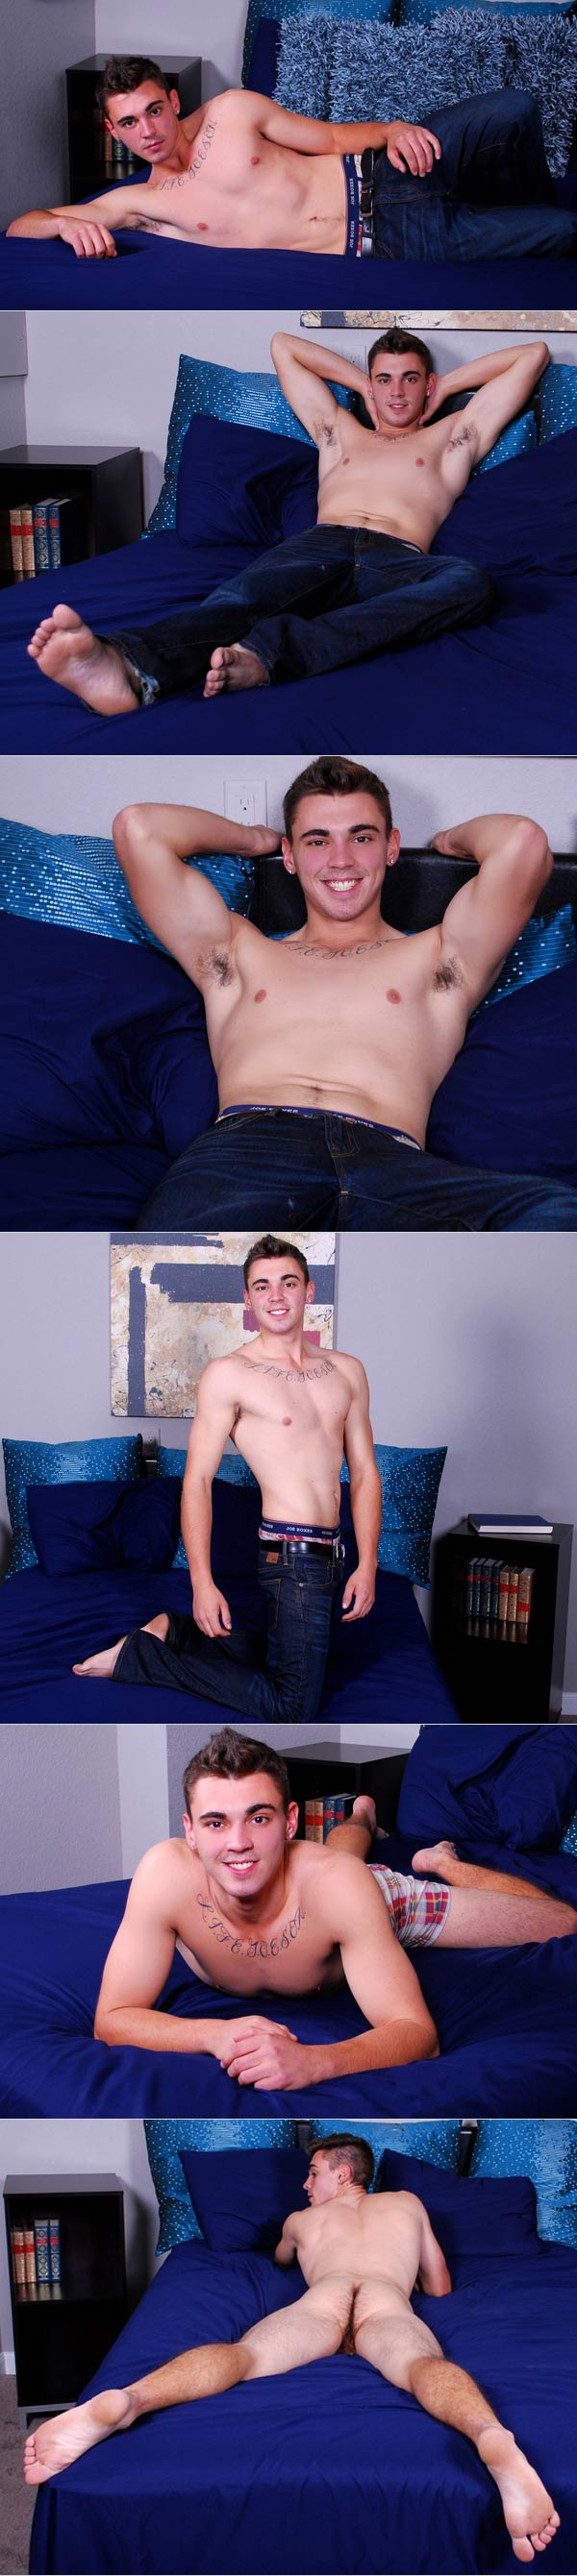 Asher Hawk (Busts A Nut) at CollegeDudes.com